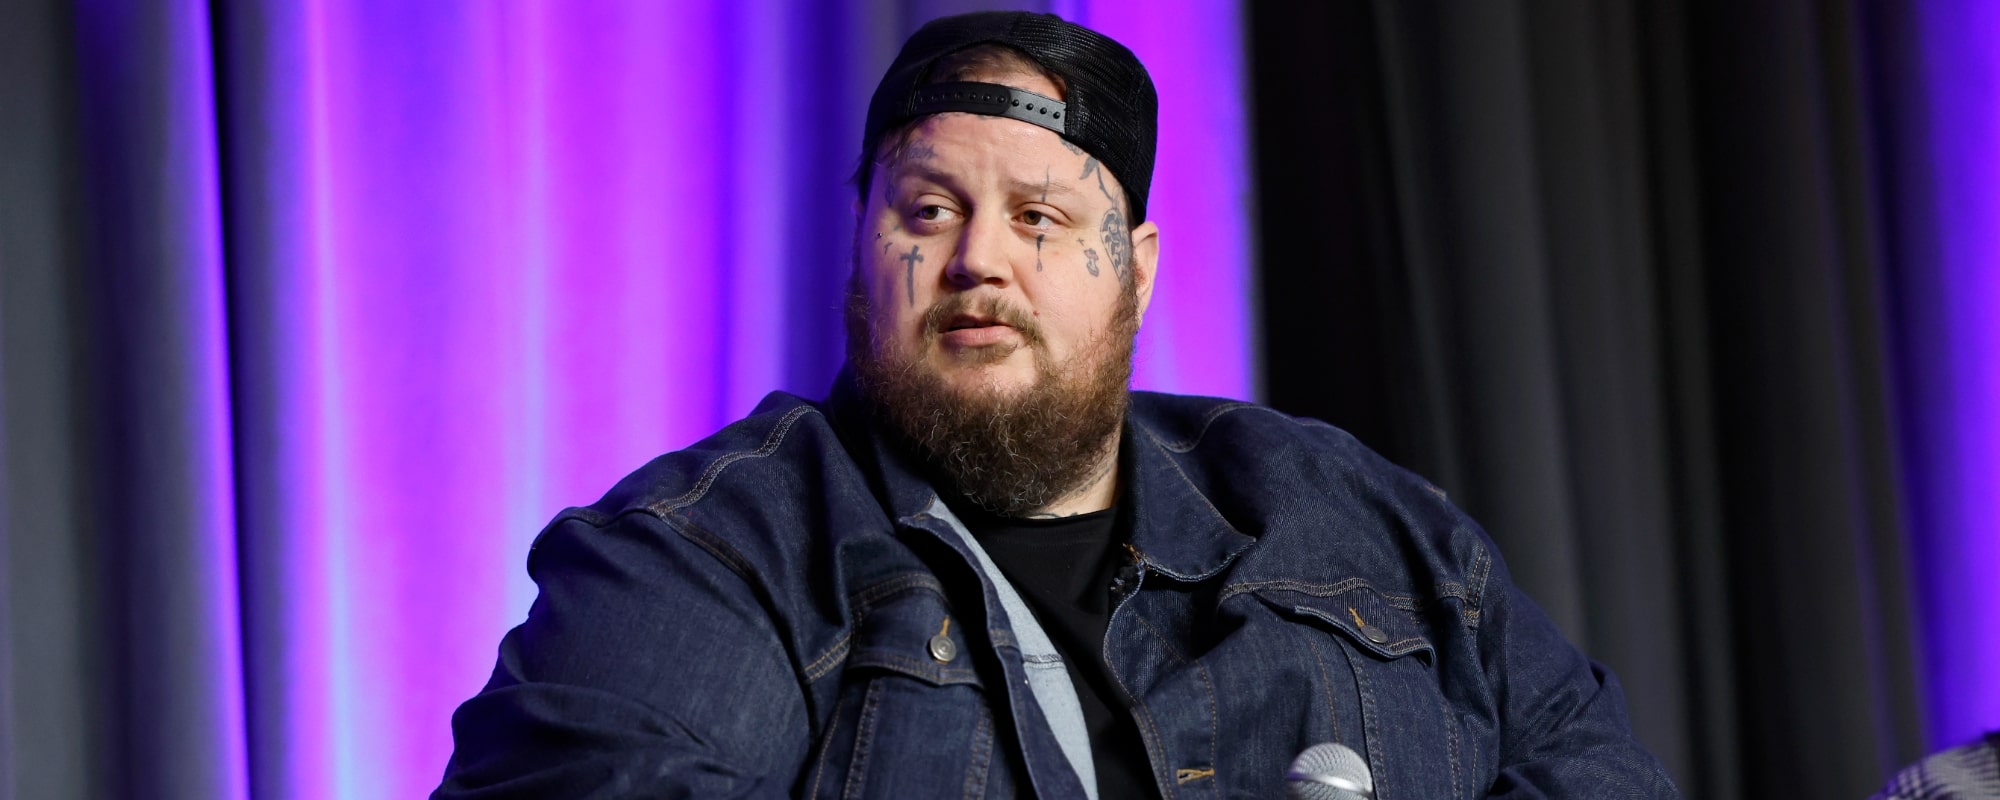 Jelly Roll Has Zero Hesitation About Replacing Katy Perry on ‘American Idol’